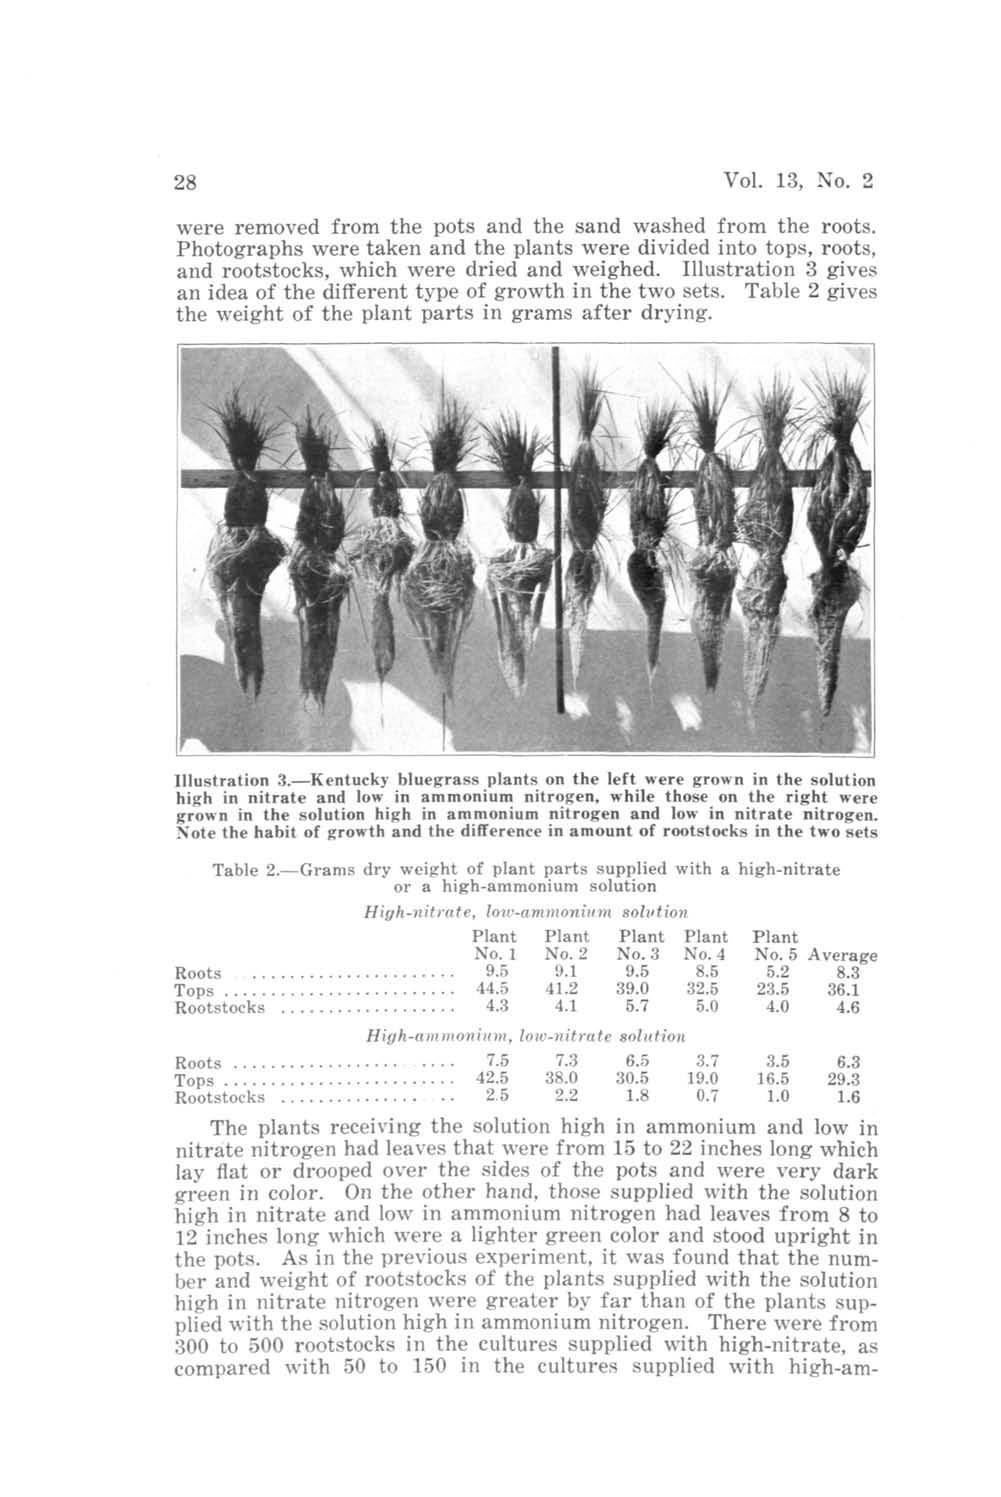 28 Vol. 13, No. 2 were removed from the pots and the sand washed from the roots. Photographs were taken and the plants were divided into tops, roots, and rootstocks, which were dried and weighed.